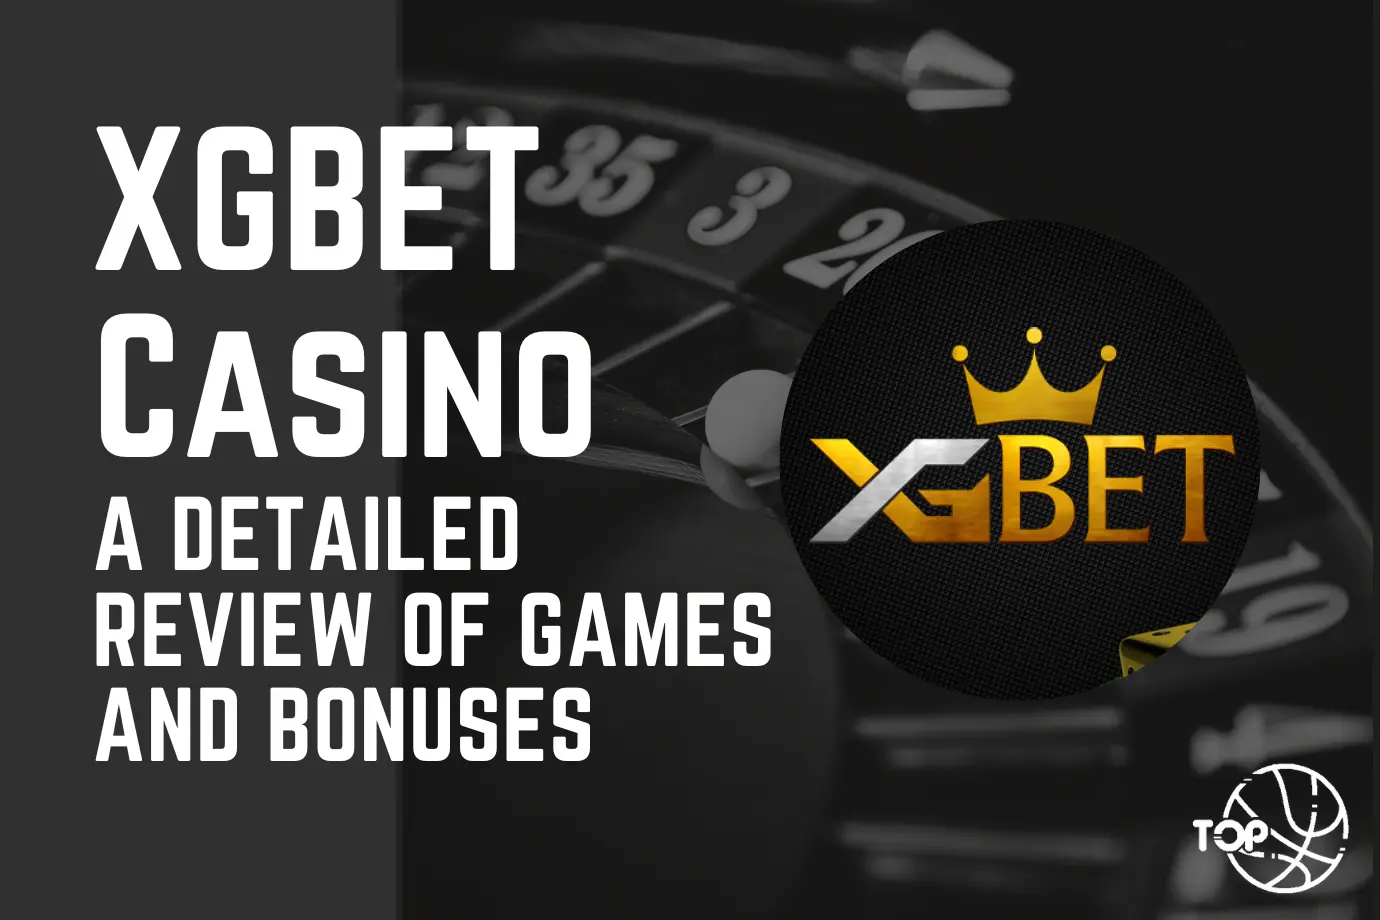 XGBET Casino: A Detailed Review of Games and Bonuses